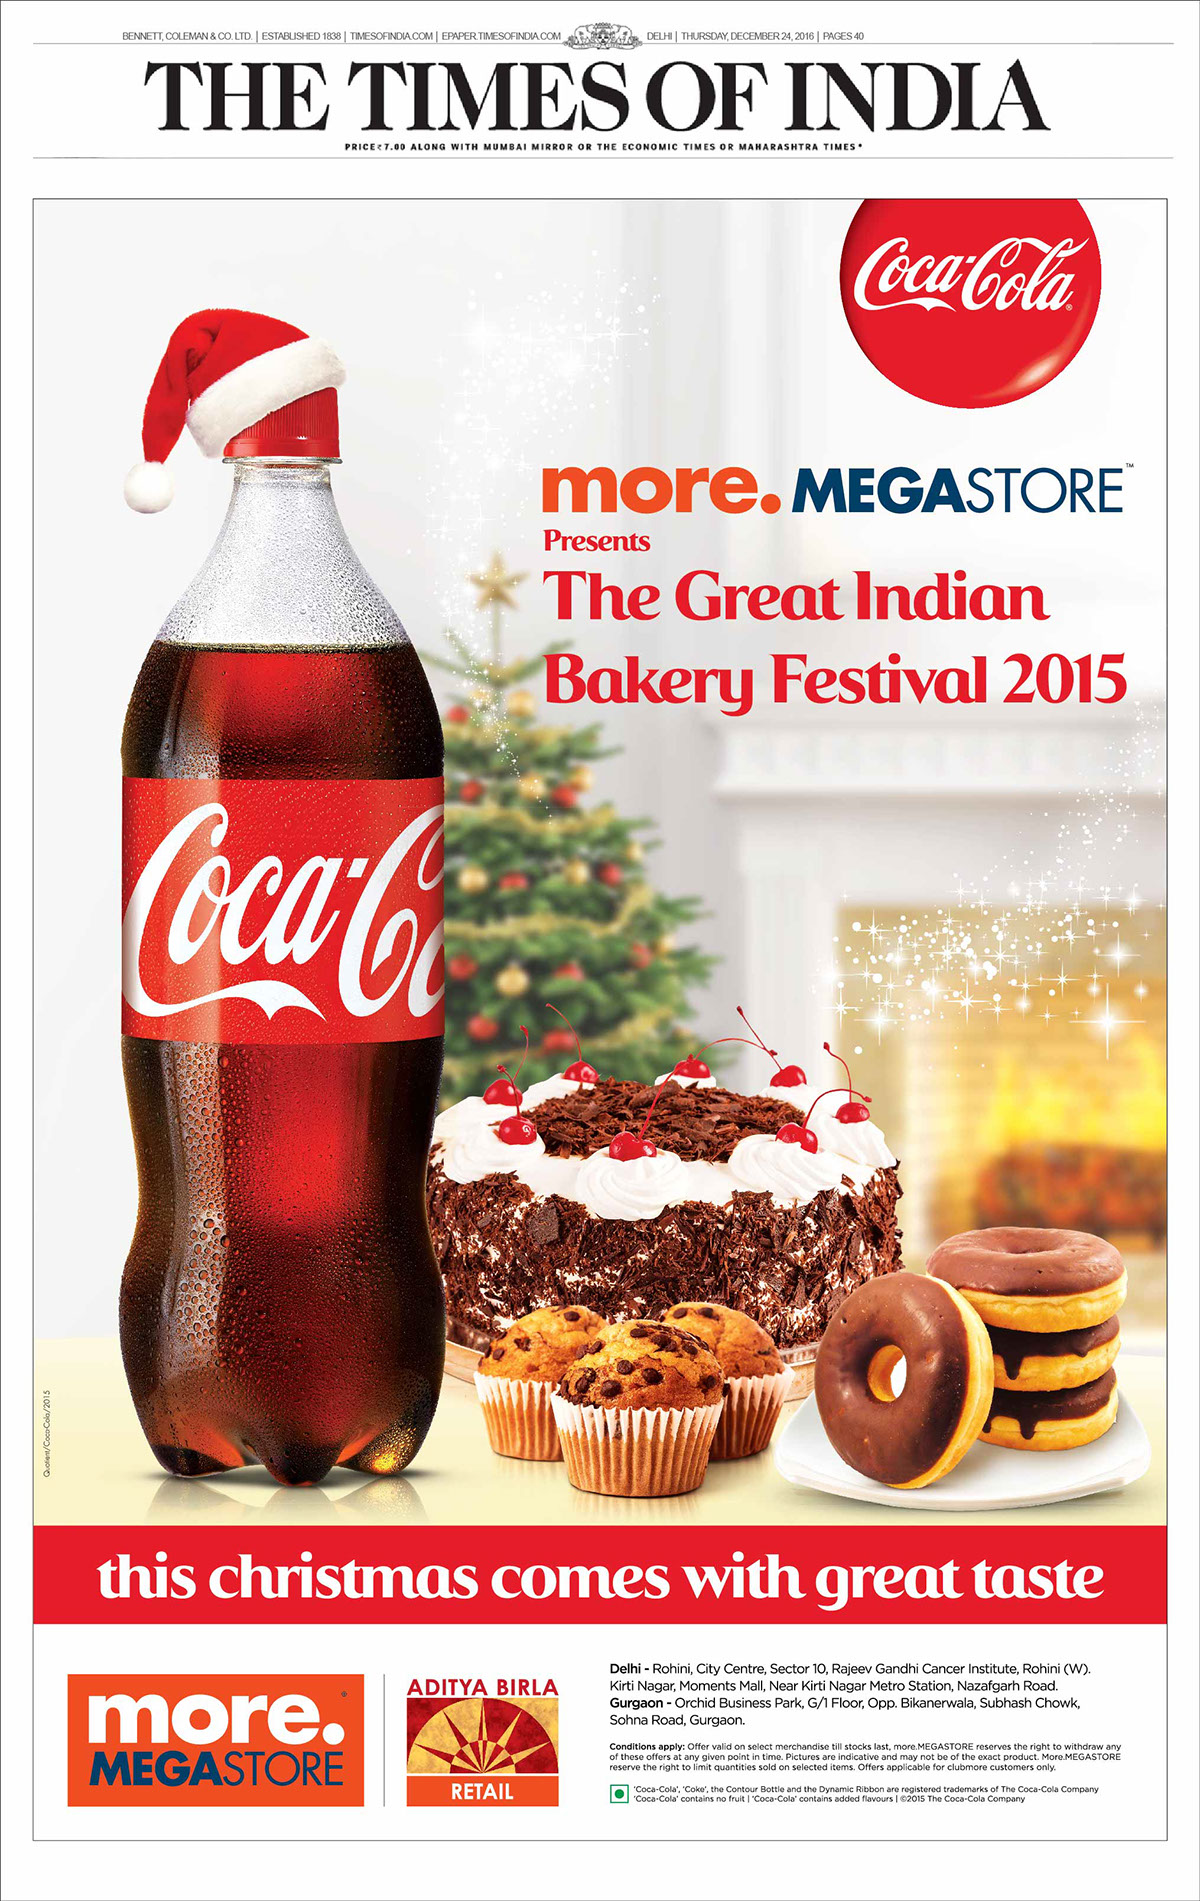 Coca-Cola Summer Press Ad Mothers Day Ad Published ads More Megastore times of india Hindustan Times Christmas soft drink